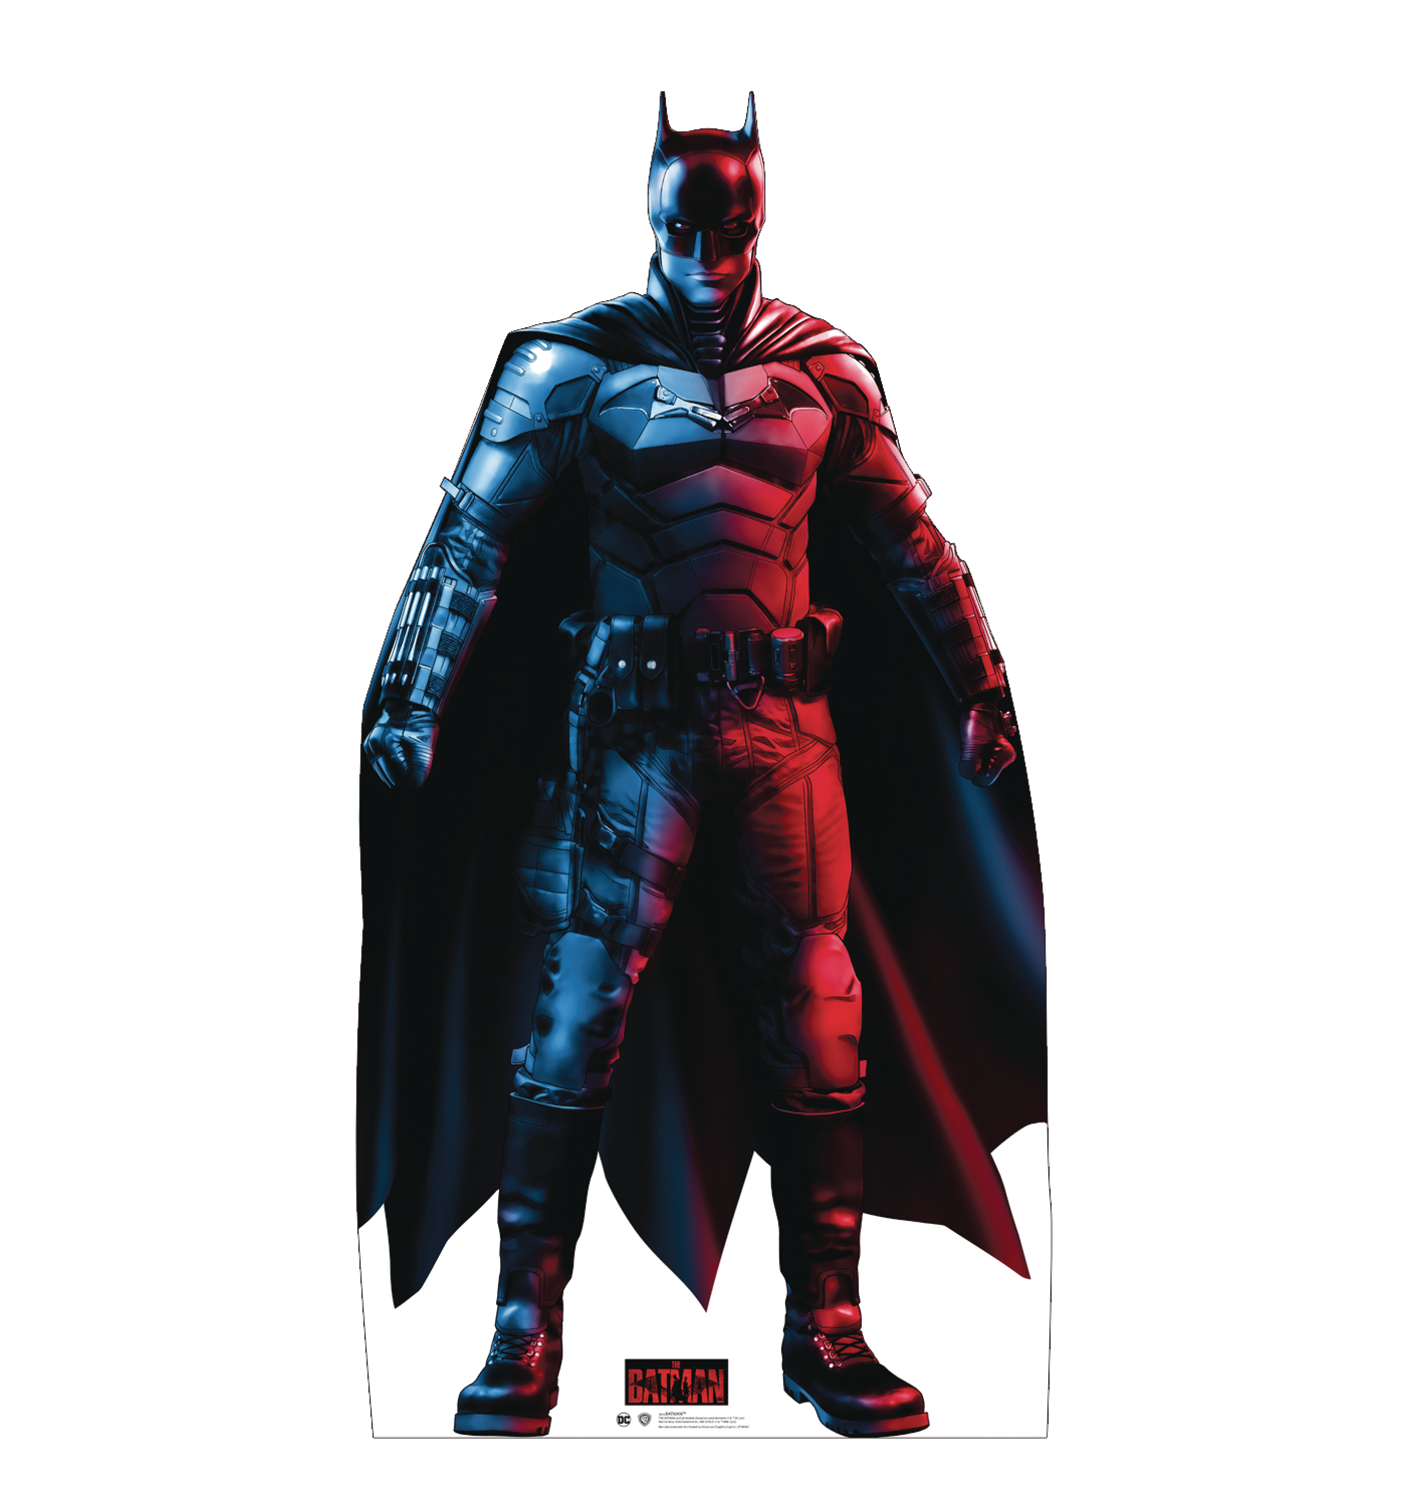 DC Heroes The Batman Life-Size Standee